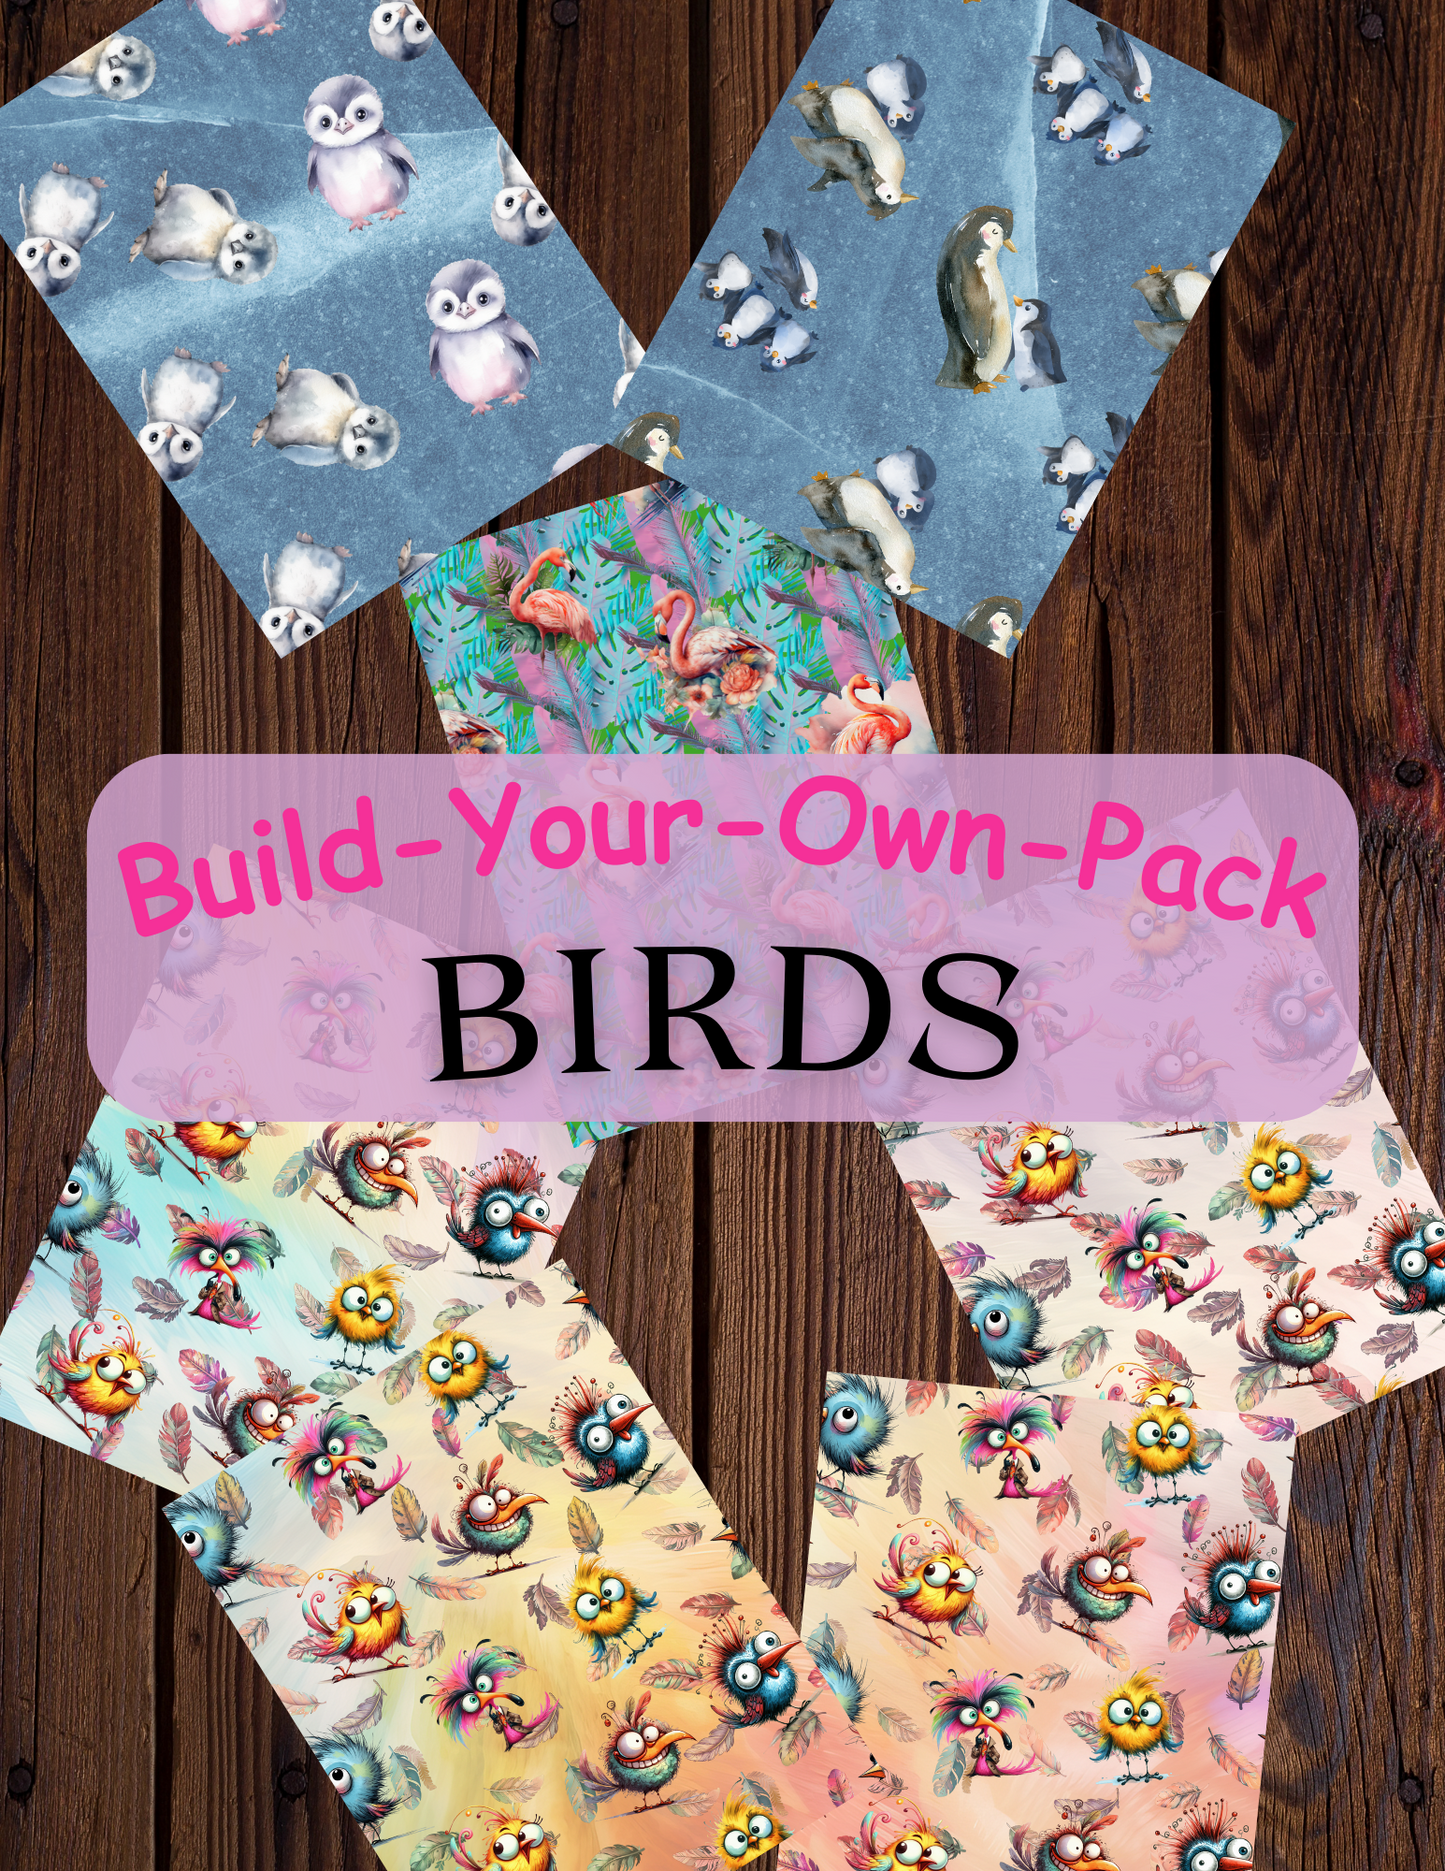 Birds Build Your Own Pack Premium Decorative Release Papers